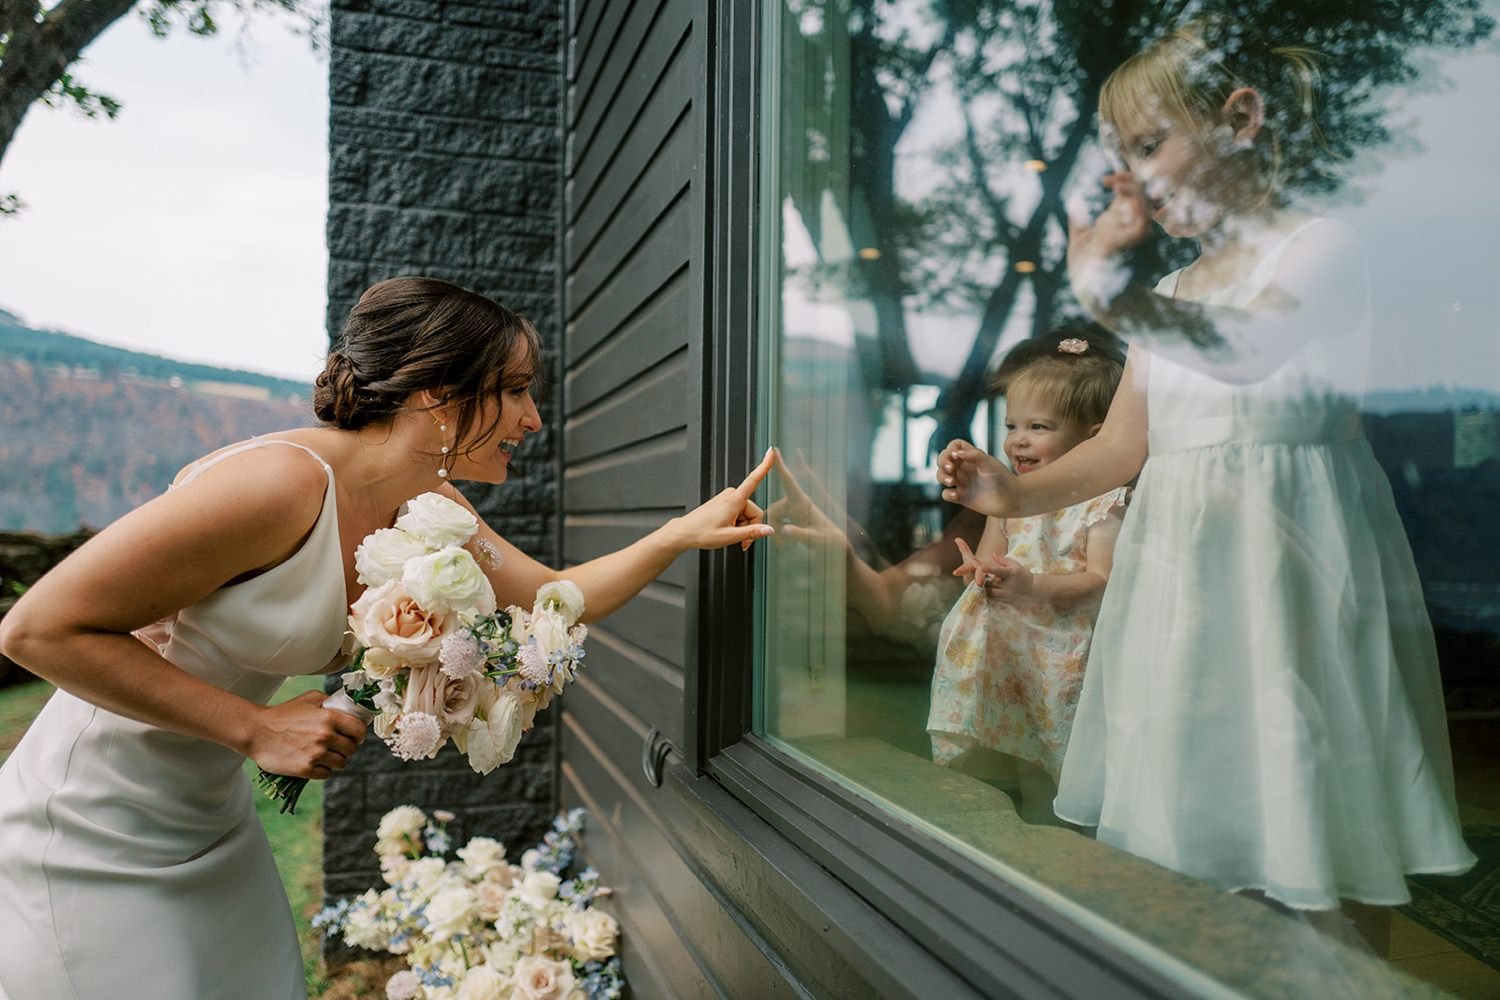 007_funny moment between a bride and the flower girls, photographed on a Leica Q, by Ryan Flynn.jpg